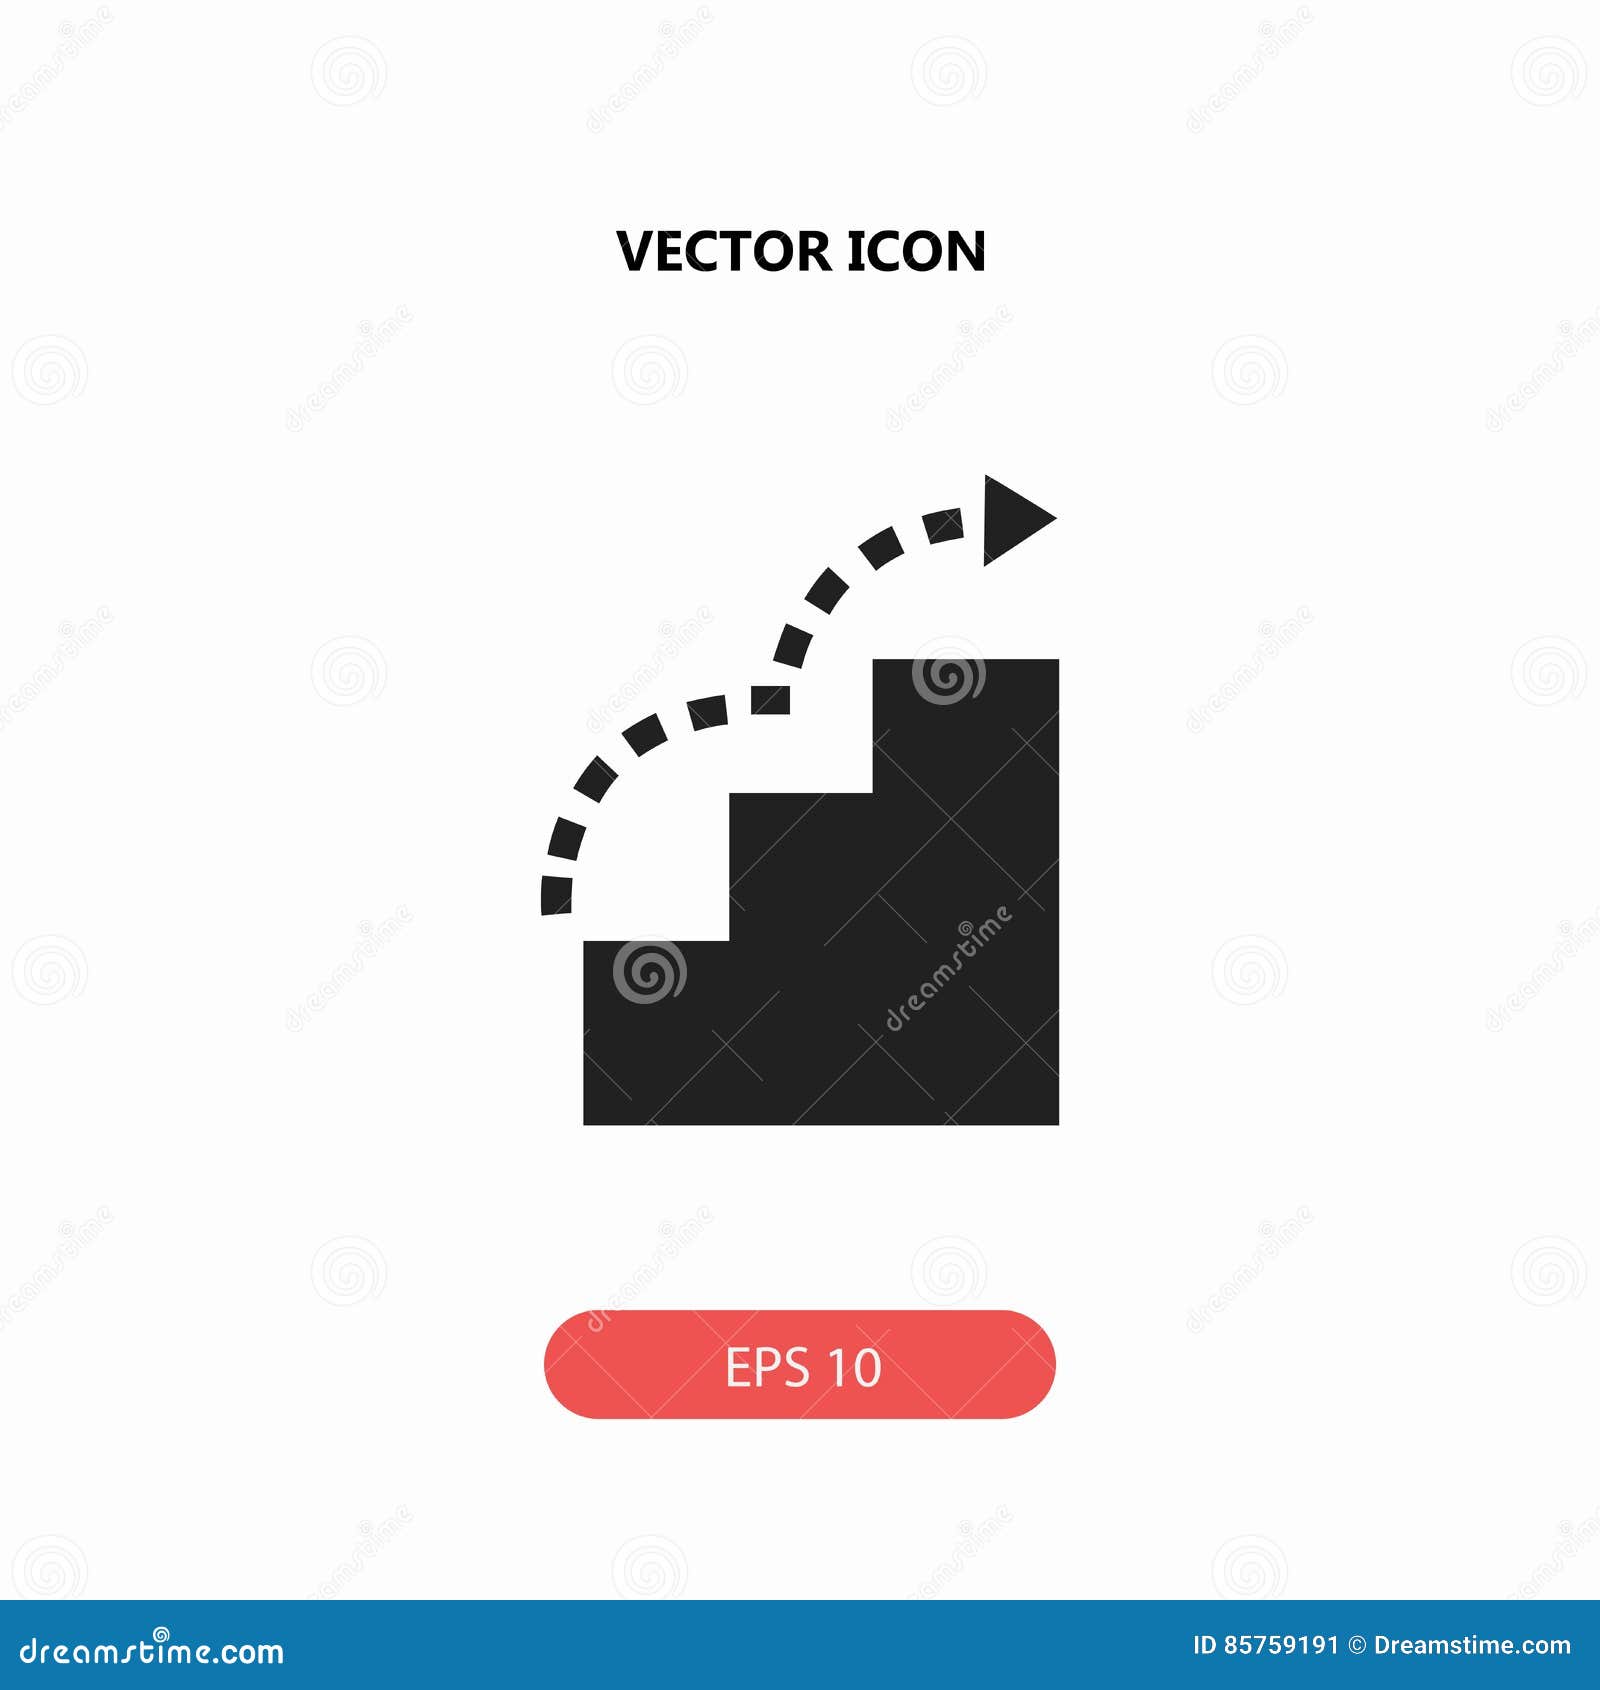 Stairs icon stock illustration. Illustration of down - 85759191